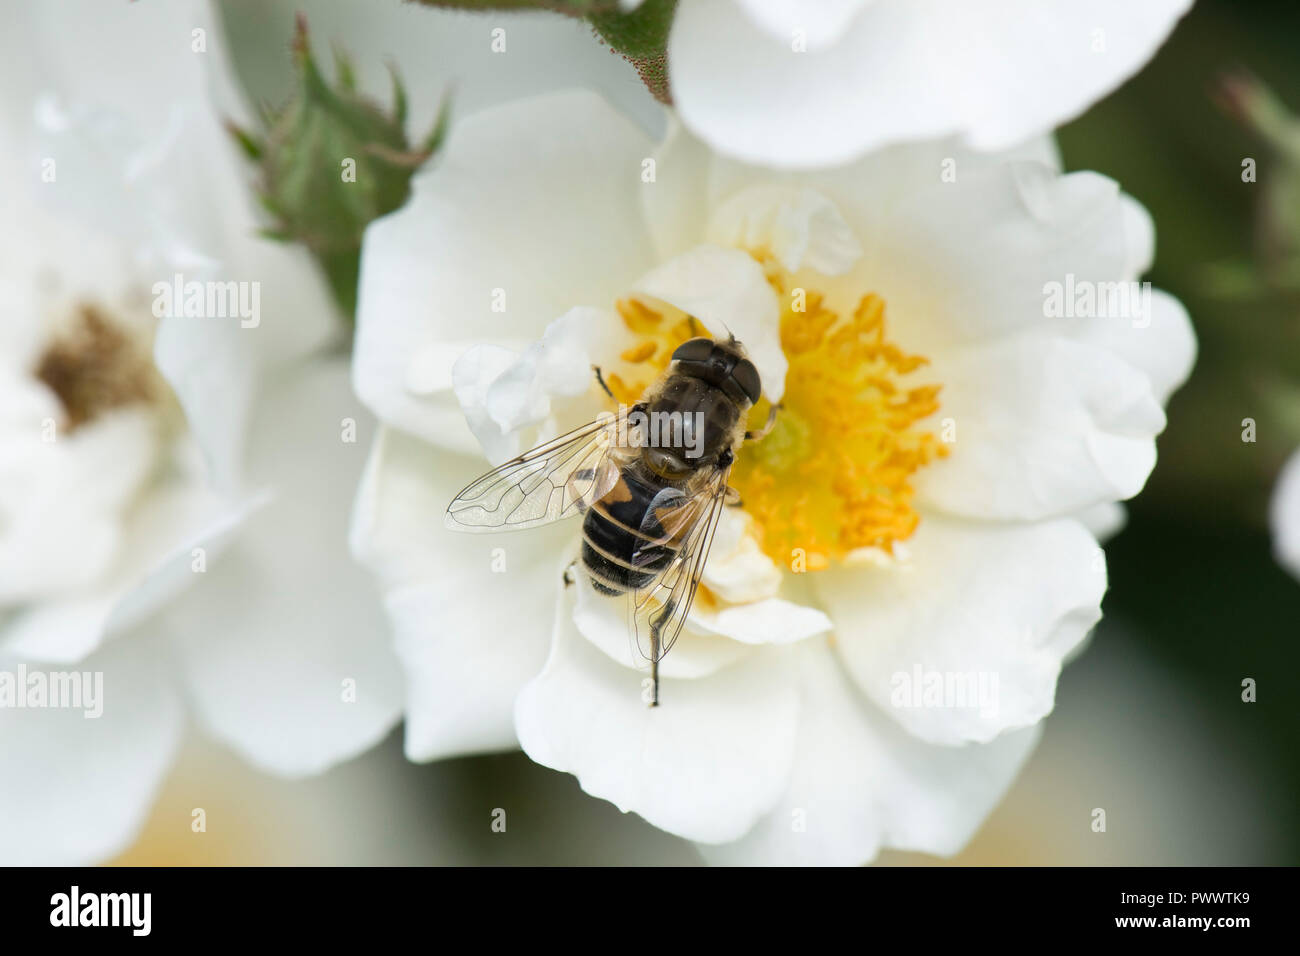 A hoverfly, Eristalis arbustorum, a drone fly landing on the white flower of a rose 'Rambling Rector', a summer pollinator, June Stock Photo